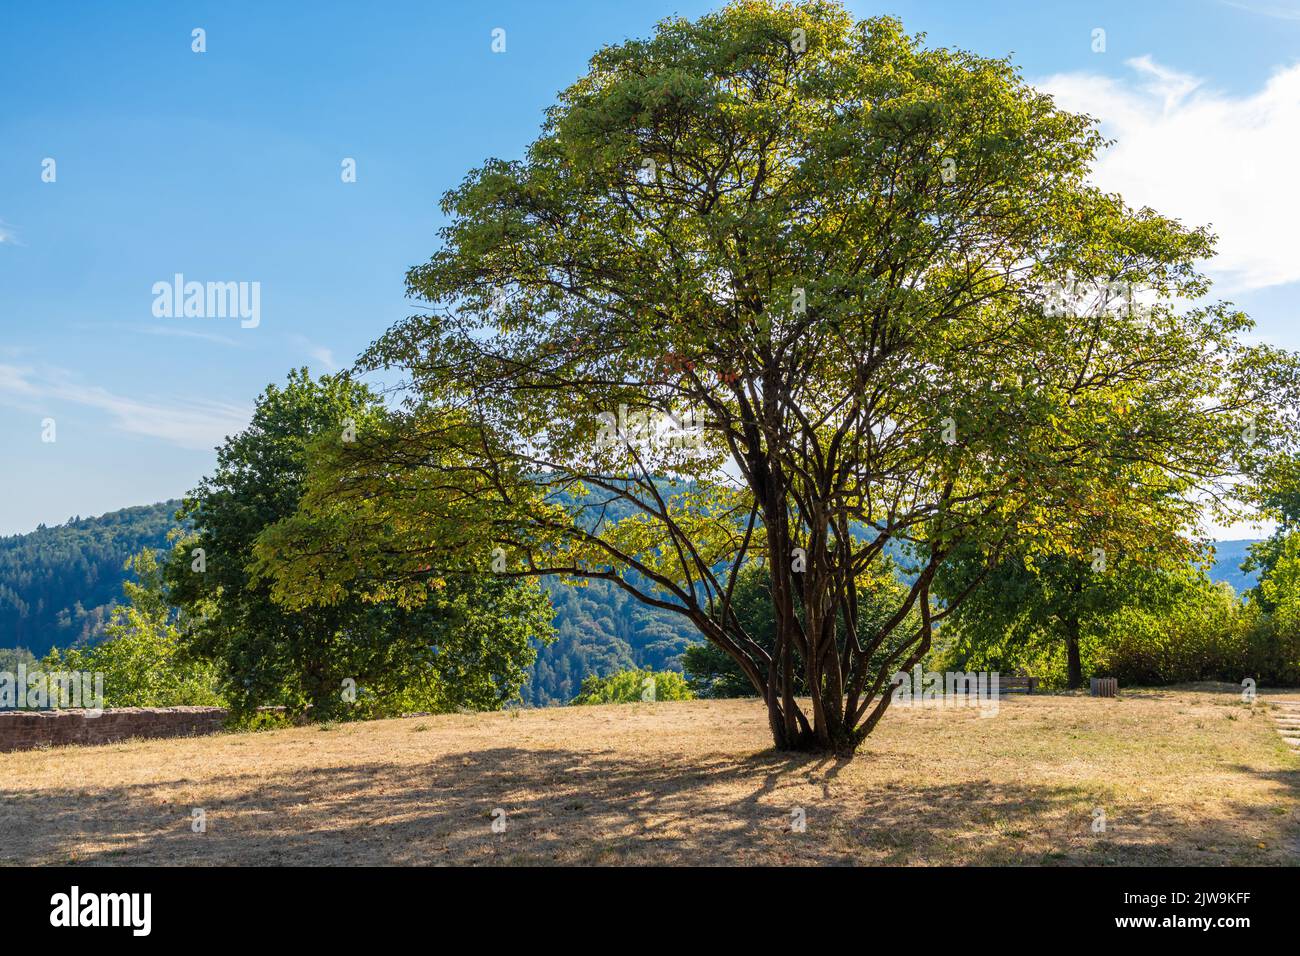 Tree in evening light in a park in midsummer. View of forested hills in the background. Stock Photo